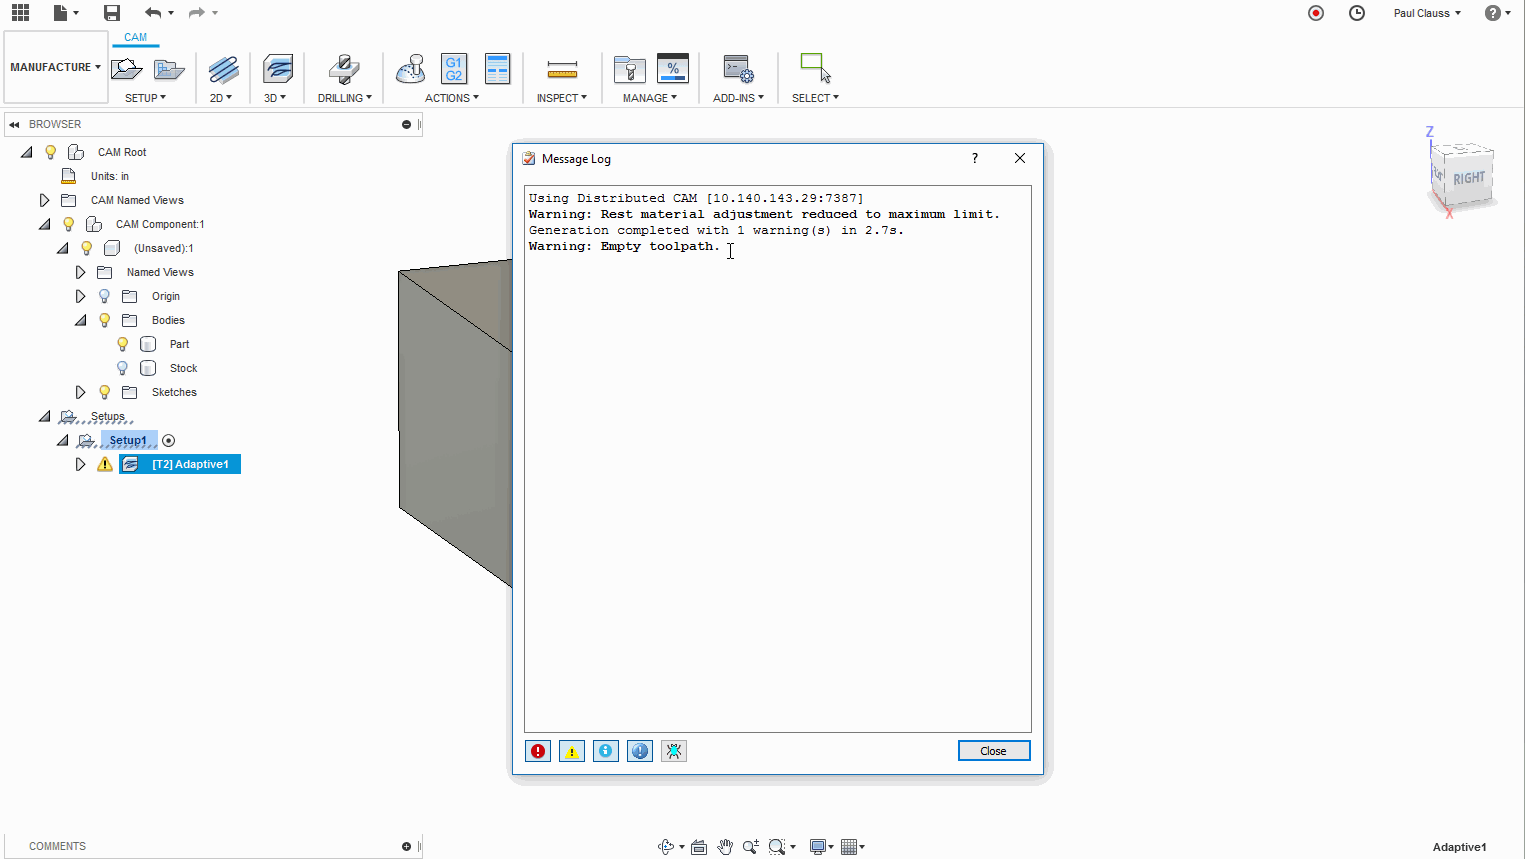 Empty Toolpath" and "No Passes to Link" in 360